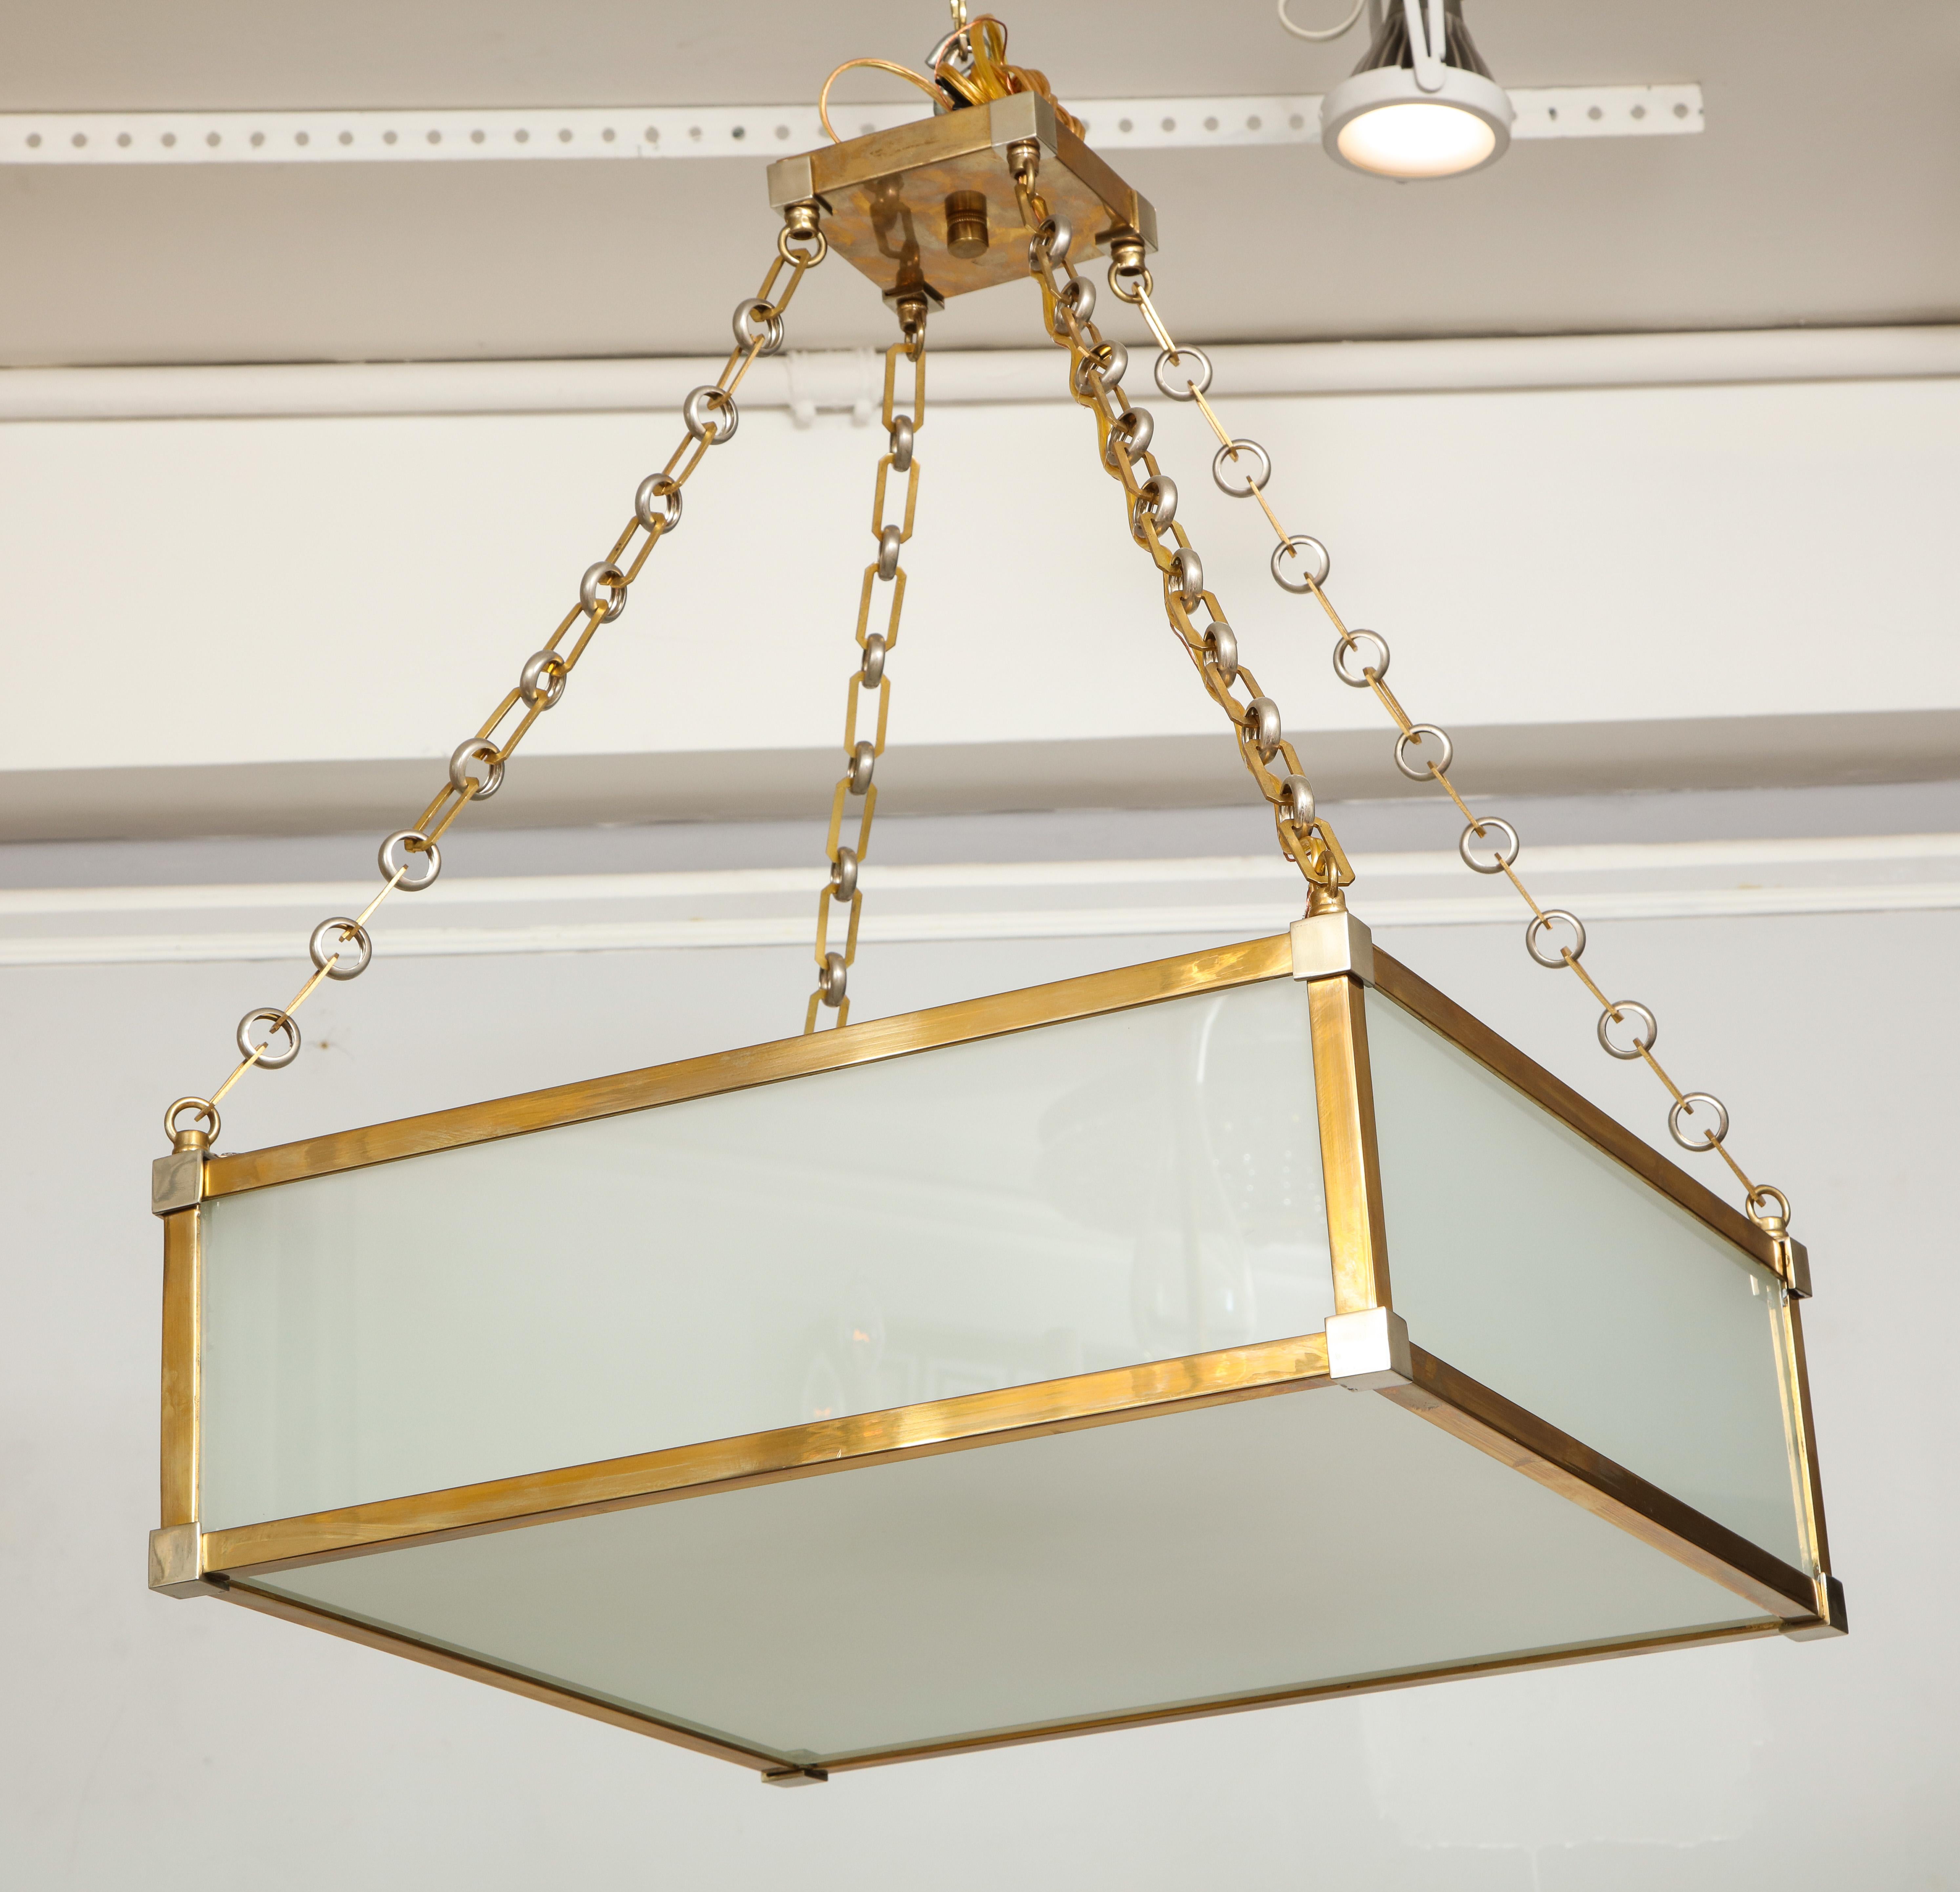 Custom Art Deco style nickel and brass-plated pendant fixture. Please note that this fixture is customizable. It can be made in different sizes and finishes.
Lead Time is 8-10 weeks.